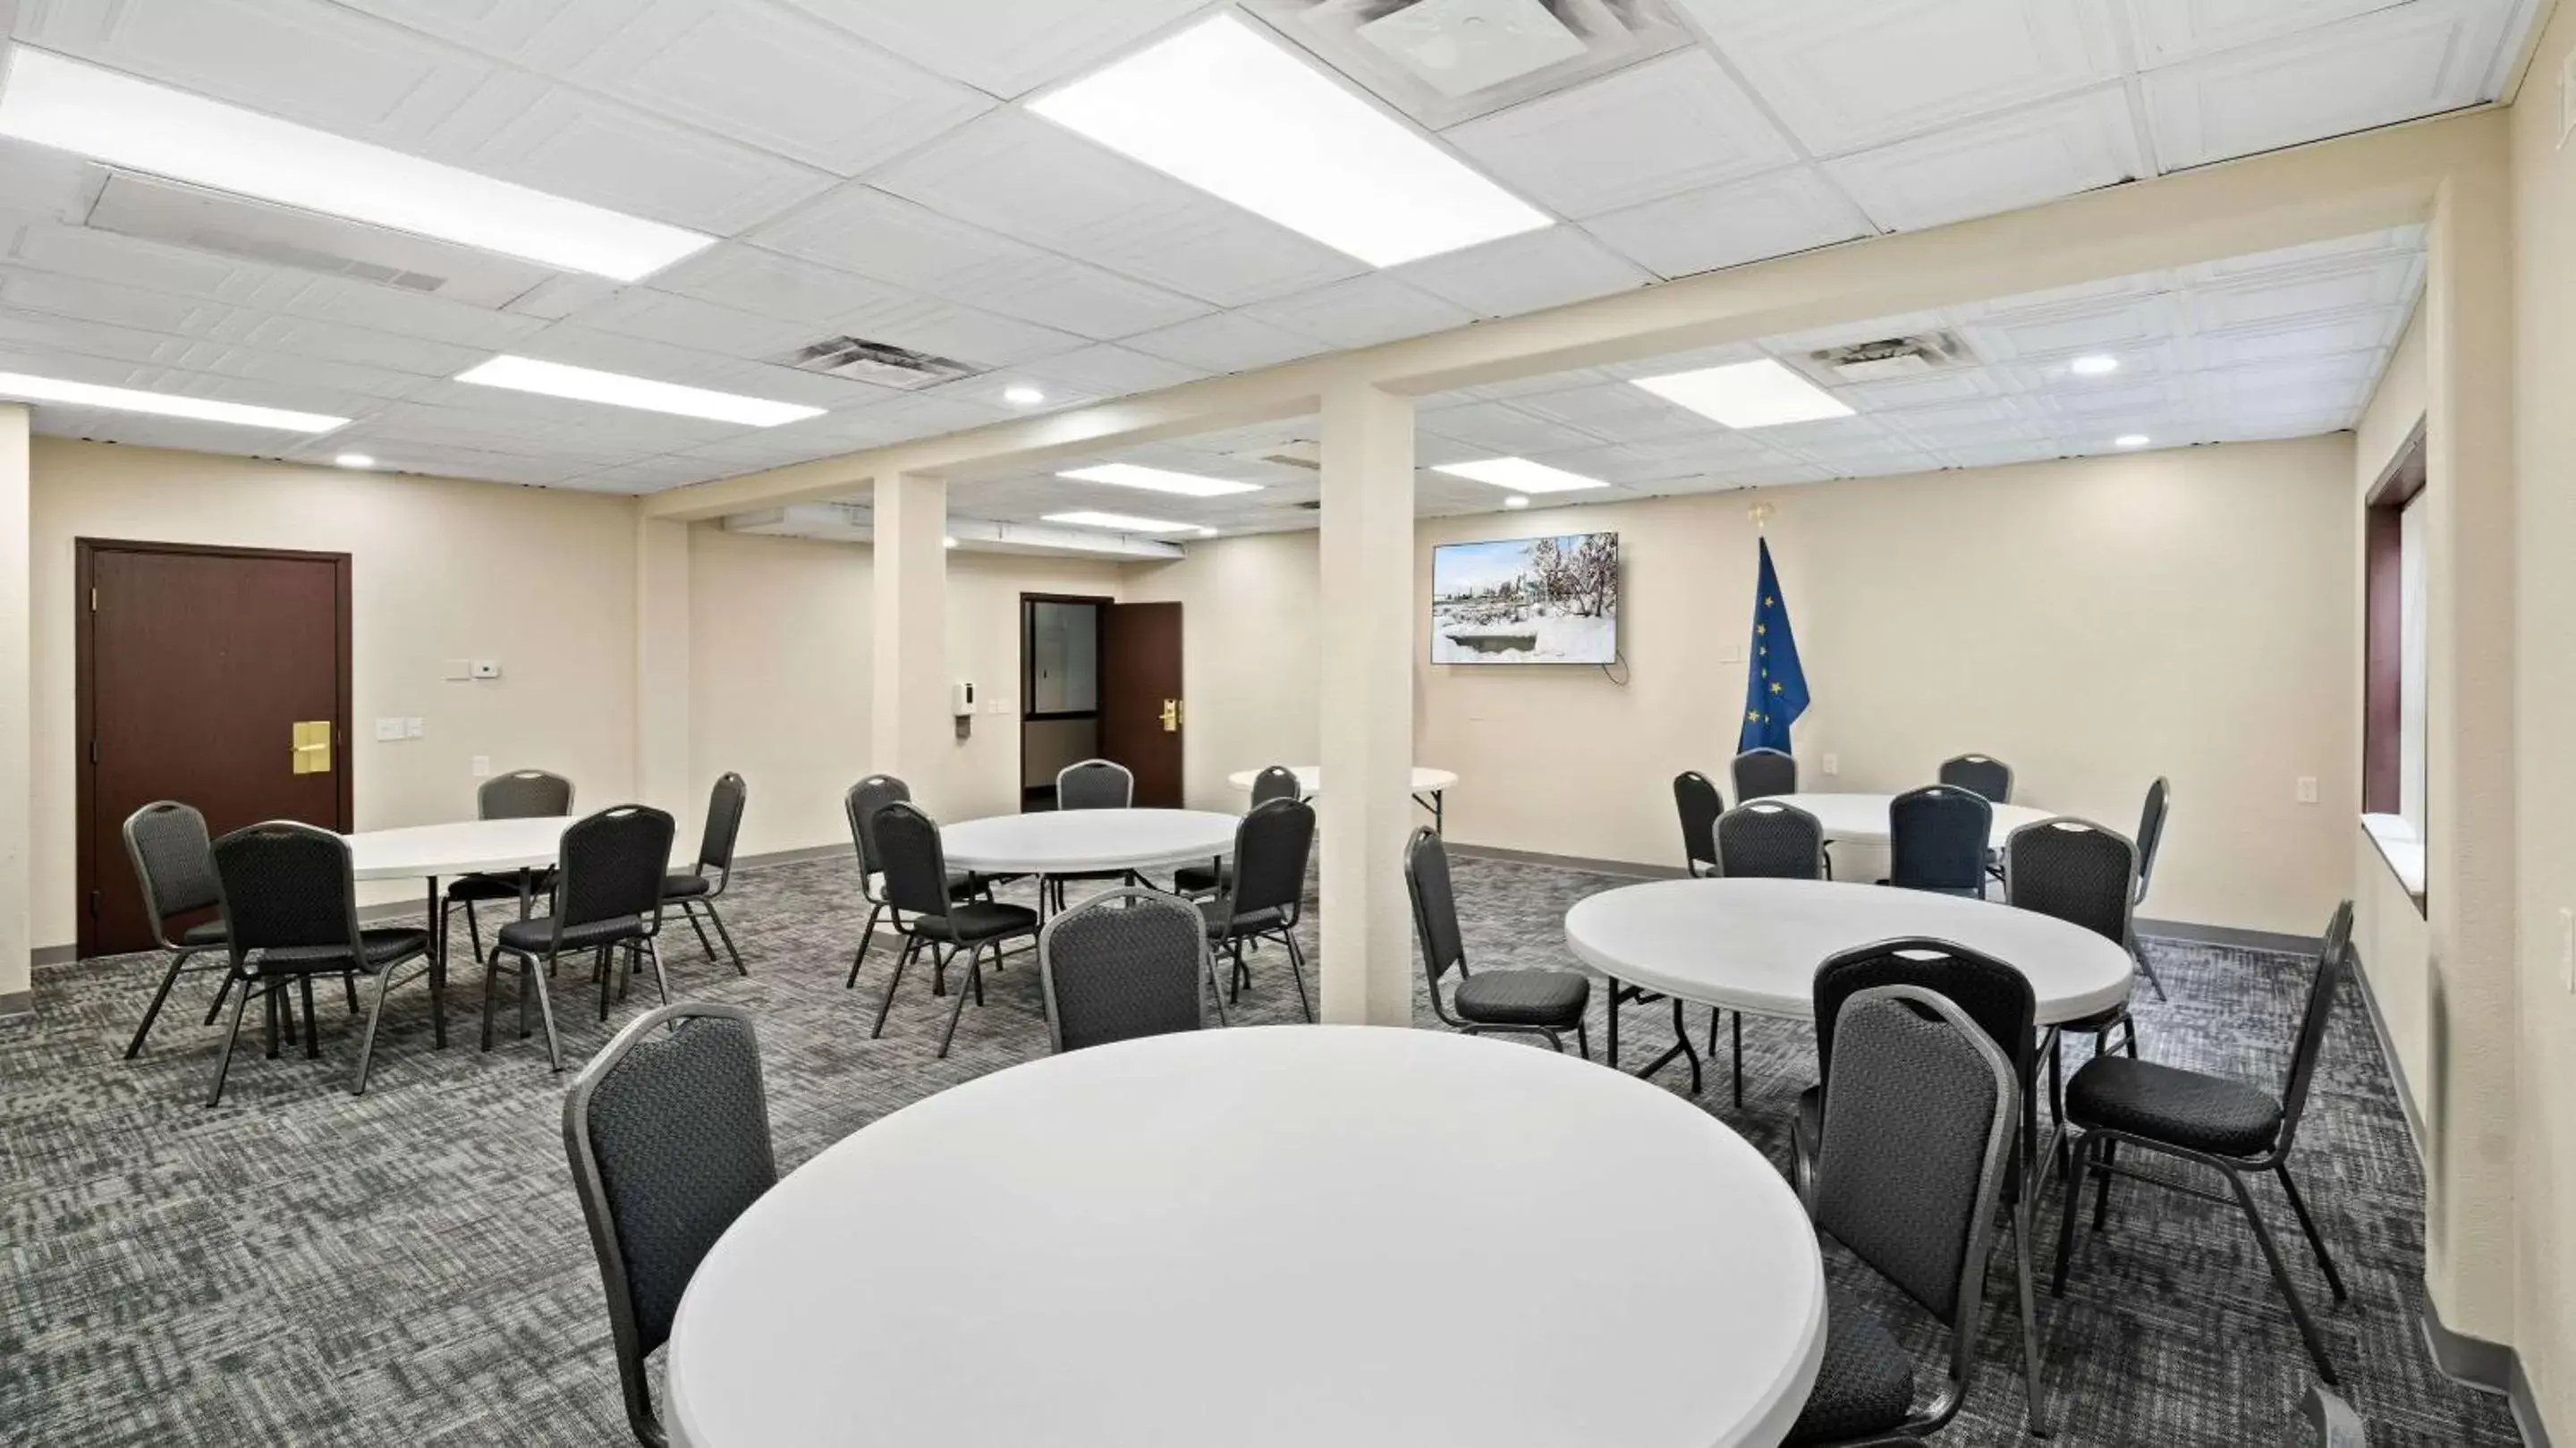 Meeting/conference room in Clarion Hotel & Suites Fairbanks near Ft. Wainwright